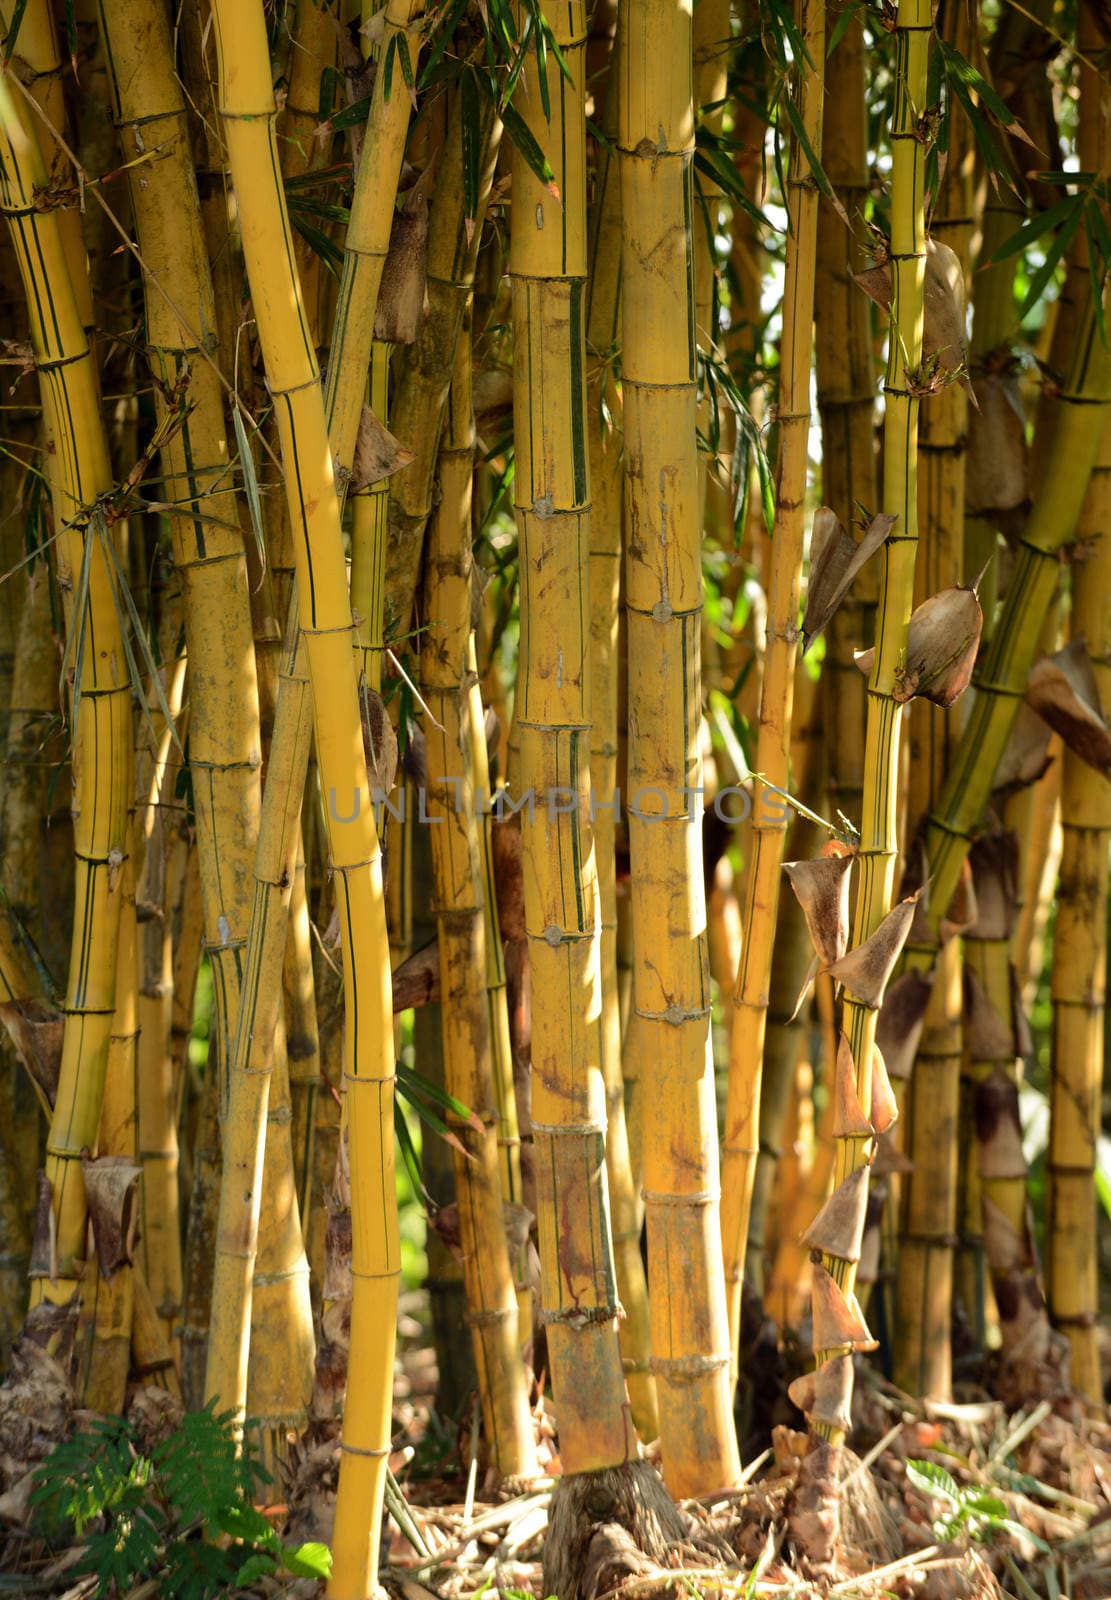 group of bamboo plants growing in the rainforest  by ftlaudgirl